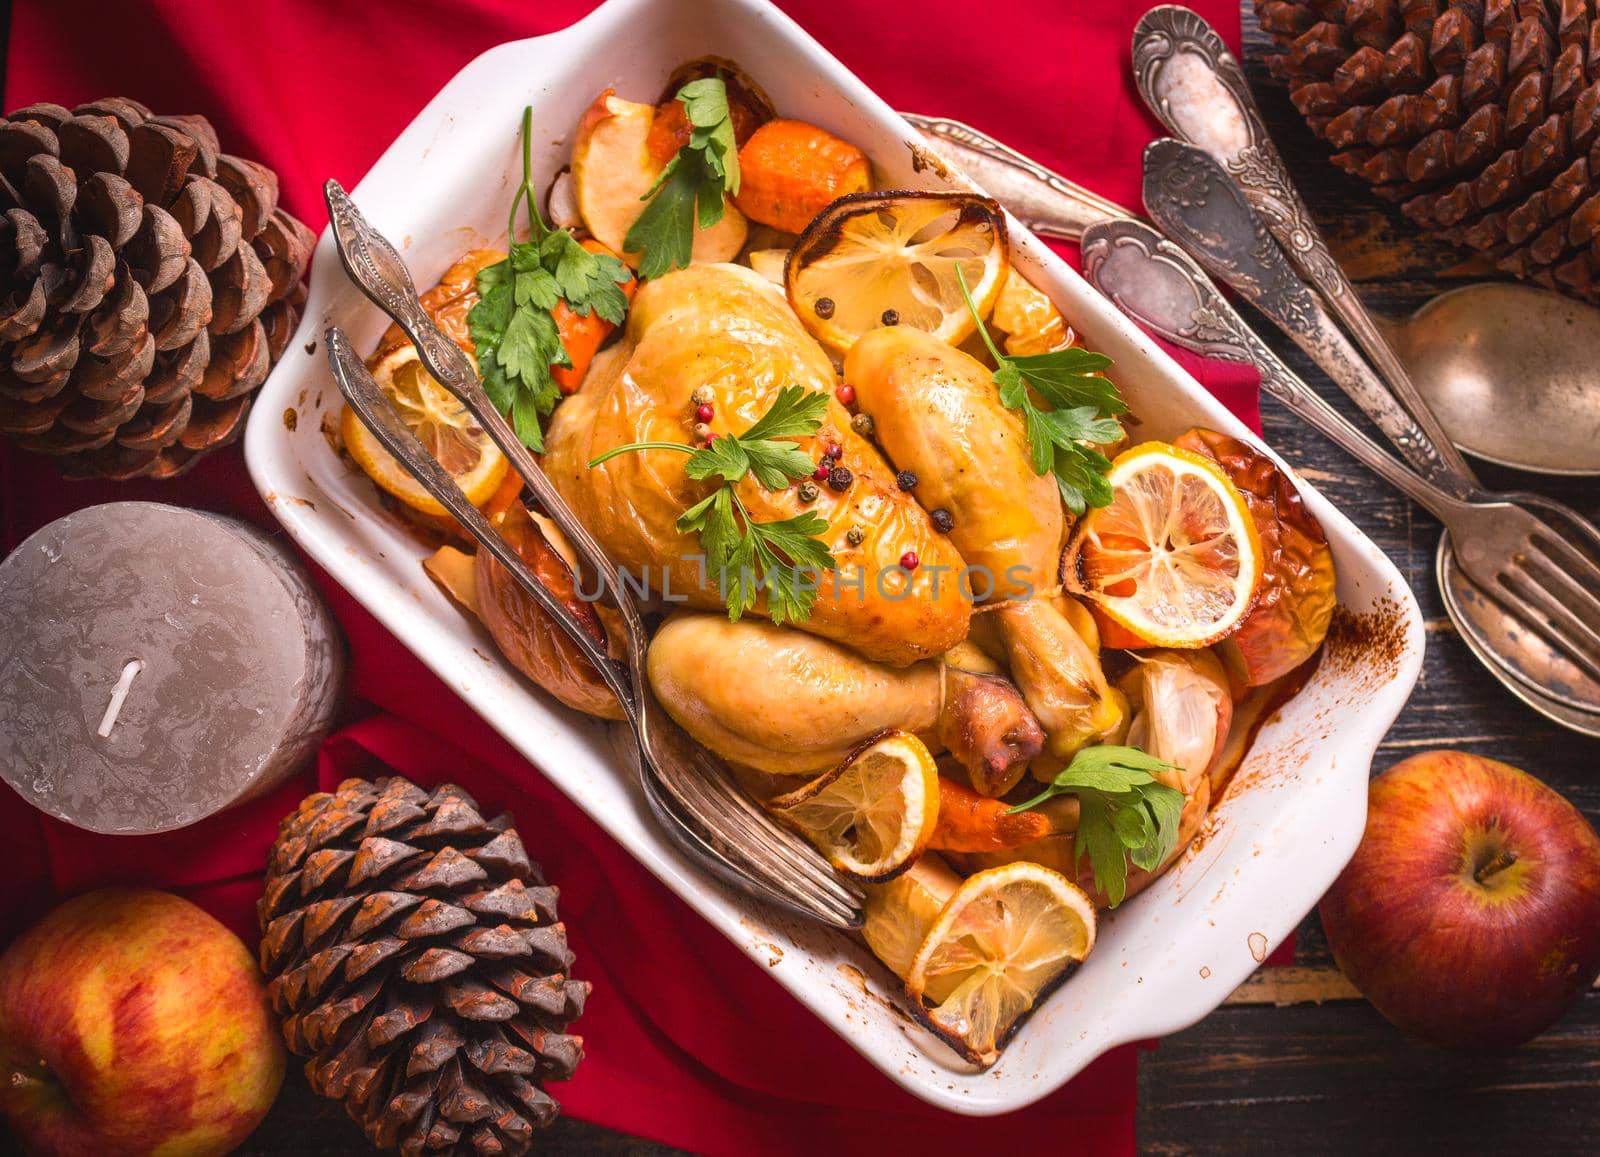 Roasted chicken. Christmas food. Rustic celebration table with roasted chicken, vegetables, apples, decorated with candles, vintage cutlery. Christmas/Thanksgiving dinner. Festive dinner. Top view